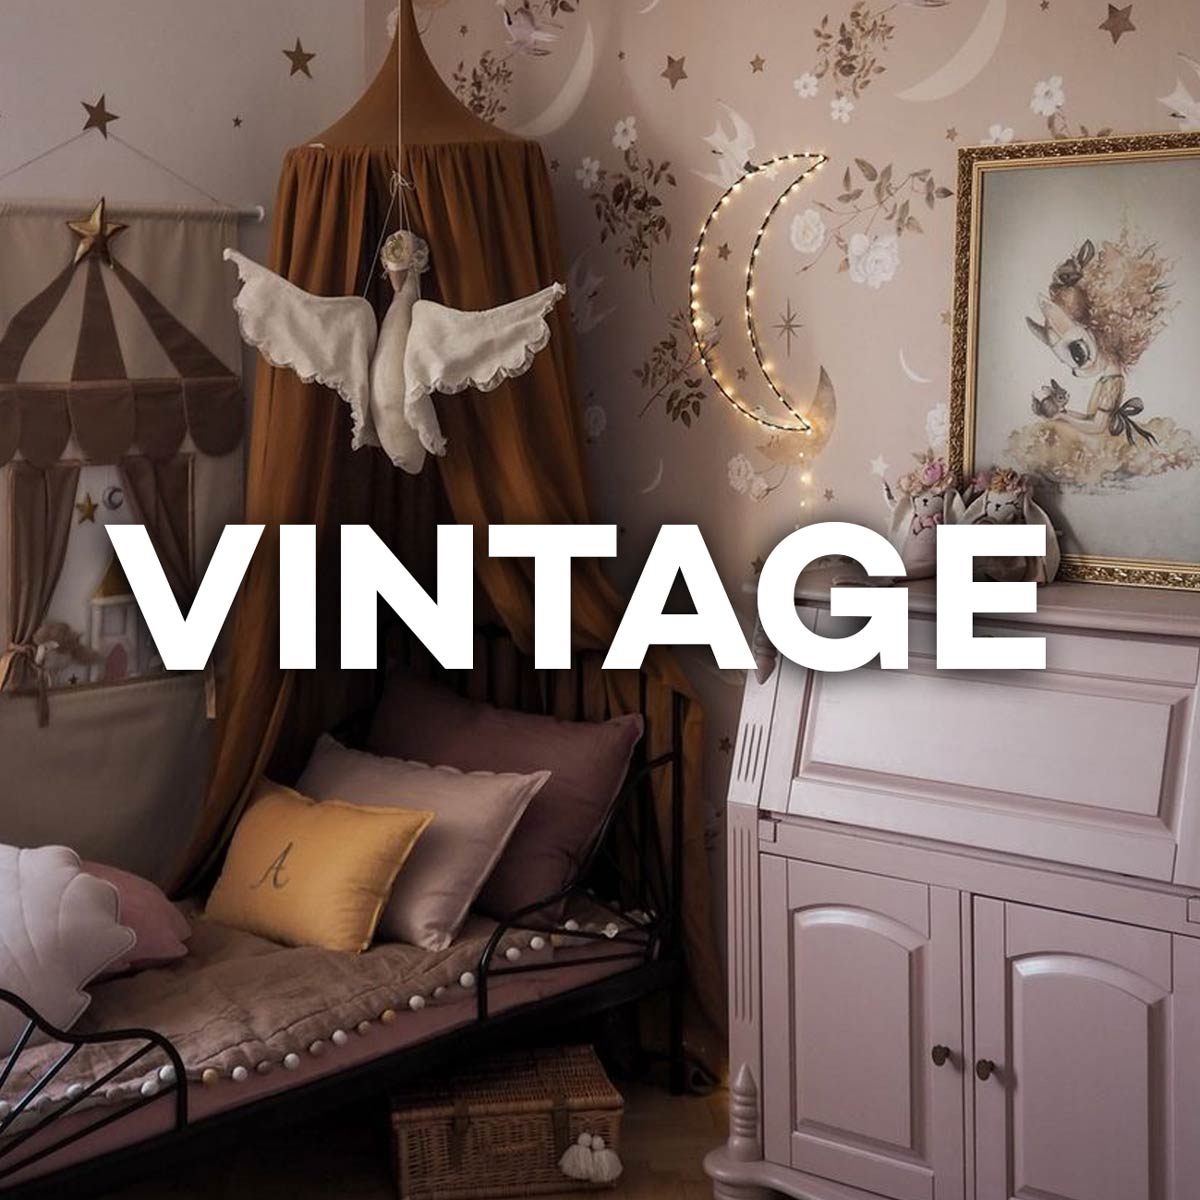 Vintage design is back! How to make a retro room for your child?